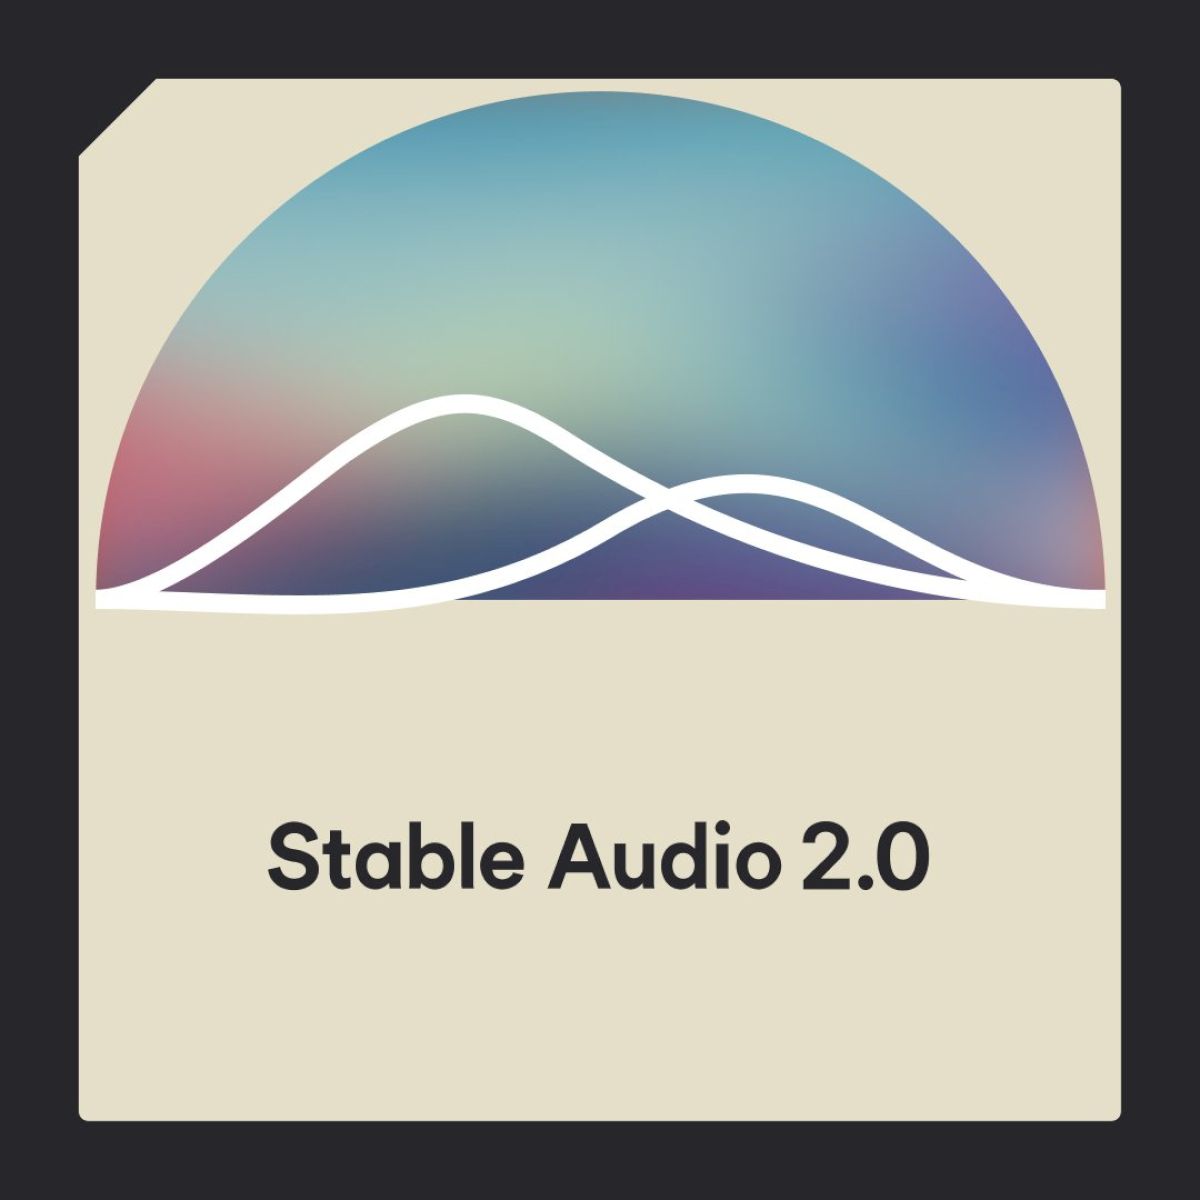 Stable Audio 2.0: The new frontier in AI-generated music